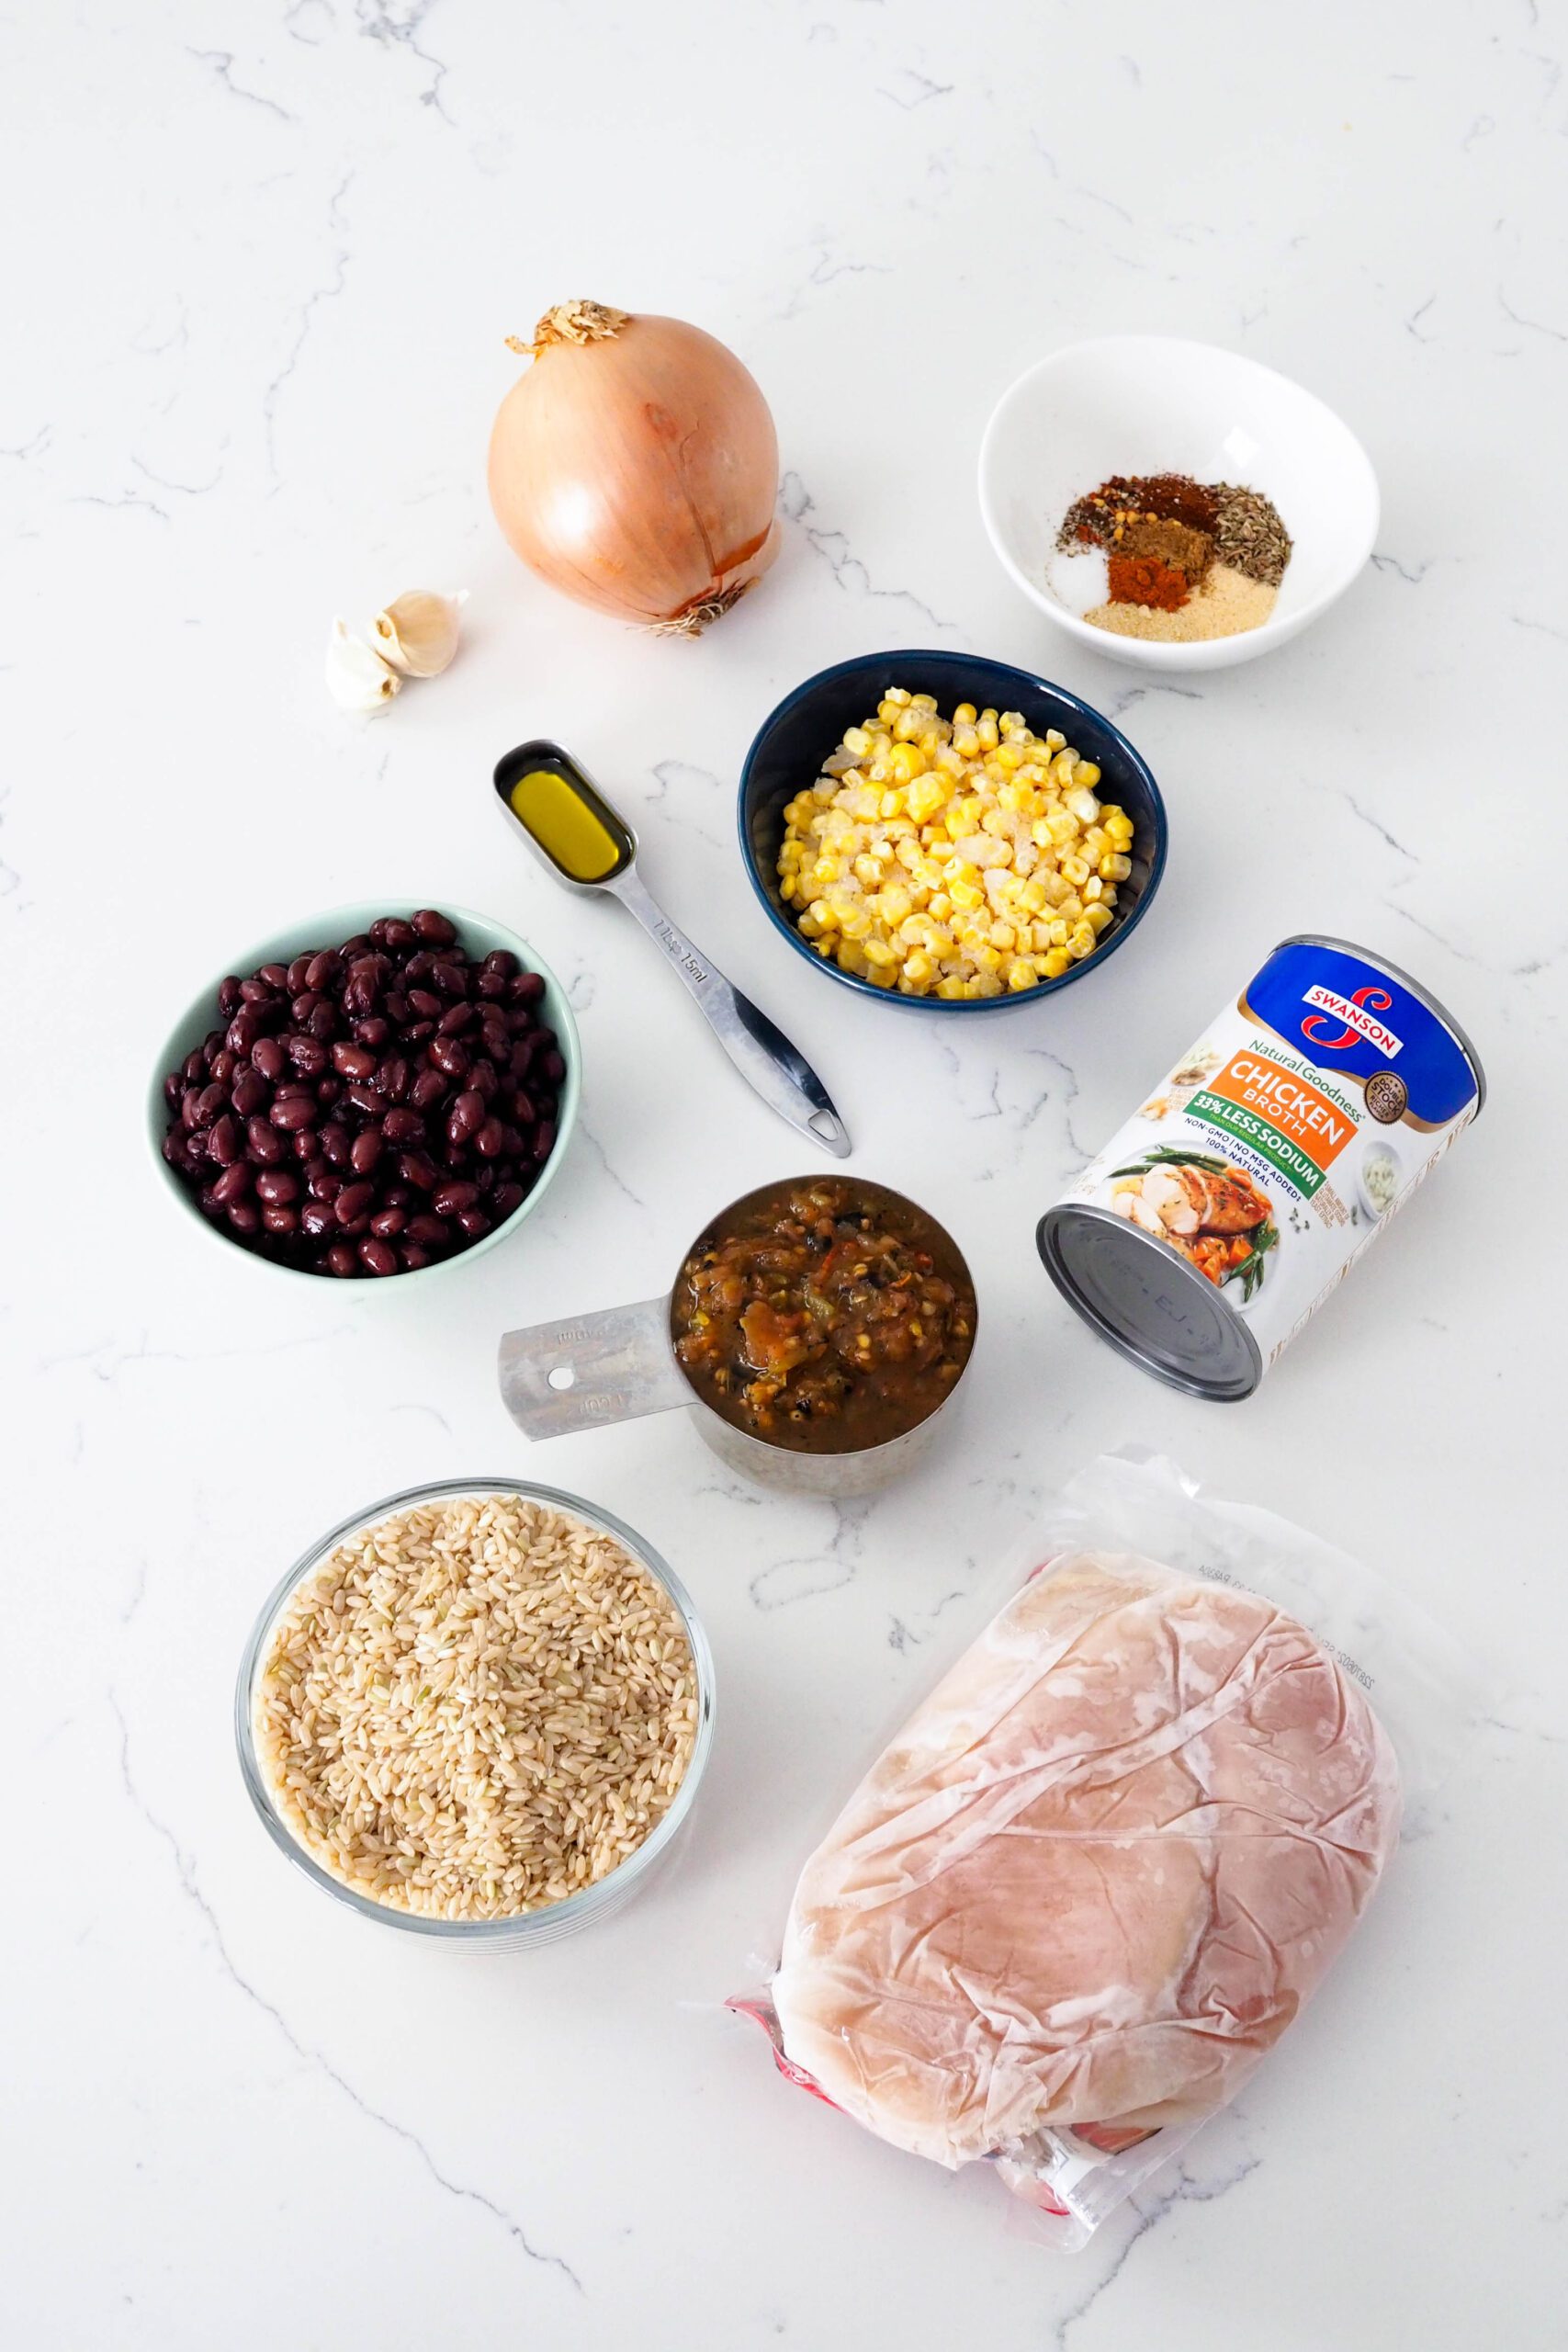 The ingredients for one-pot chicken and brown rice on a quartz countertop.